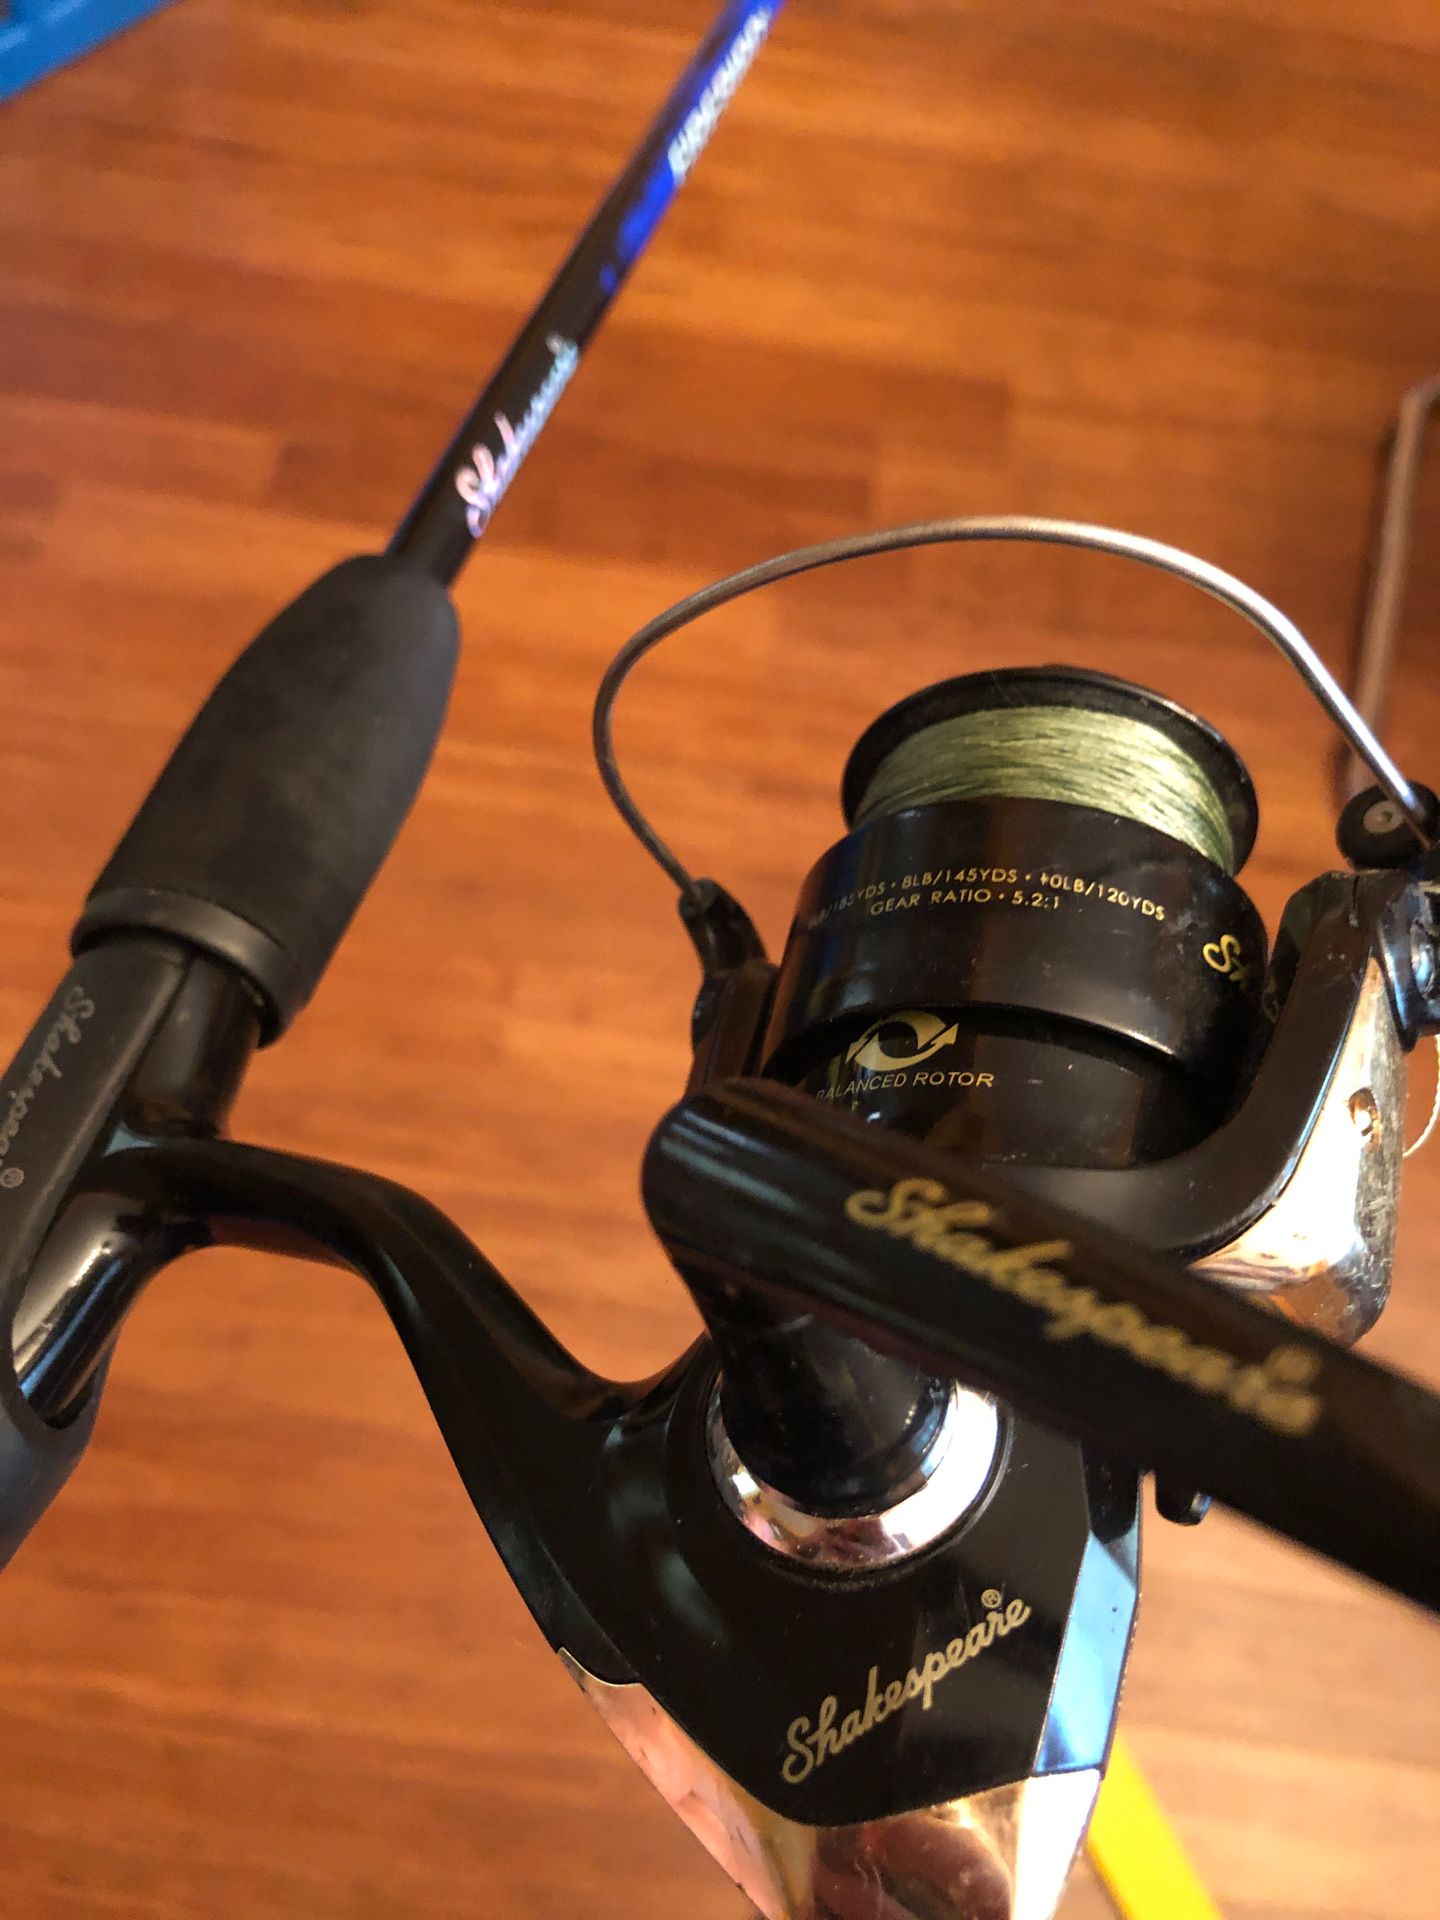 FISHING REEL AND ROD LIKE NEW ”SHAKESPEARE BRAND